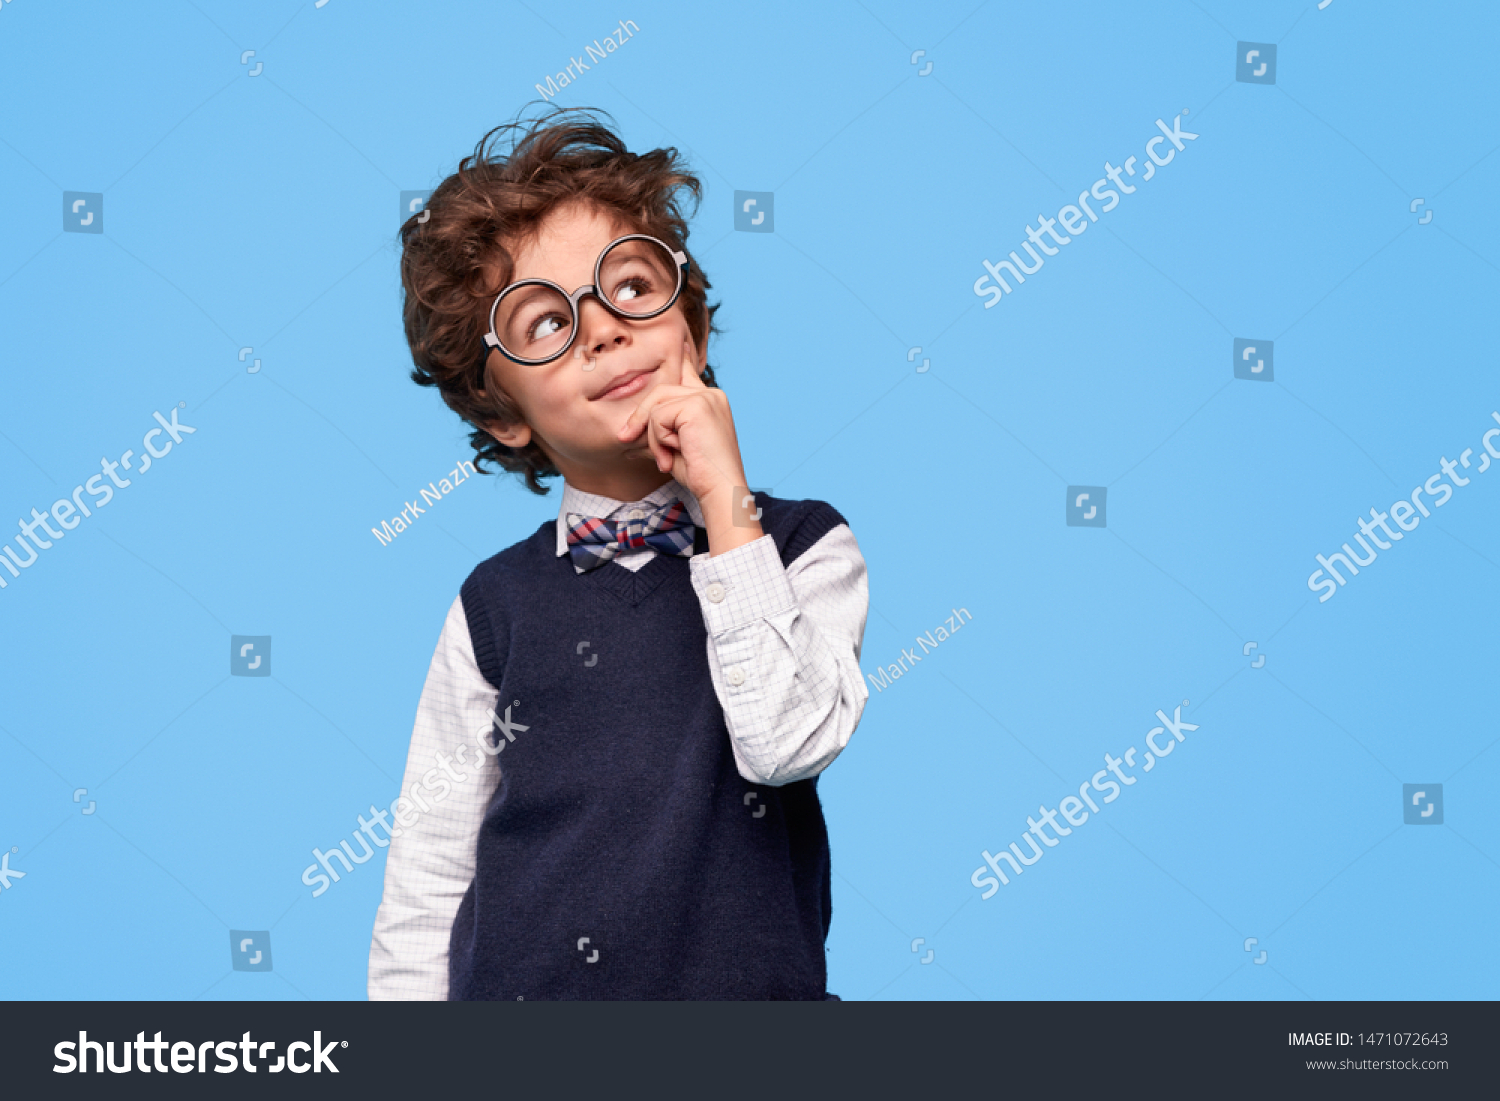 Smart wunderkind in nerdy glasses and school uniform touching cheek and looking up while thinking against blue background #1471072643